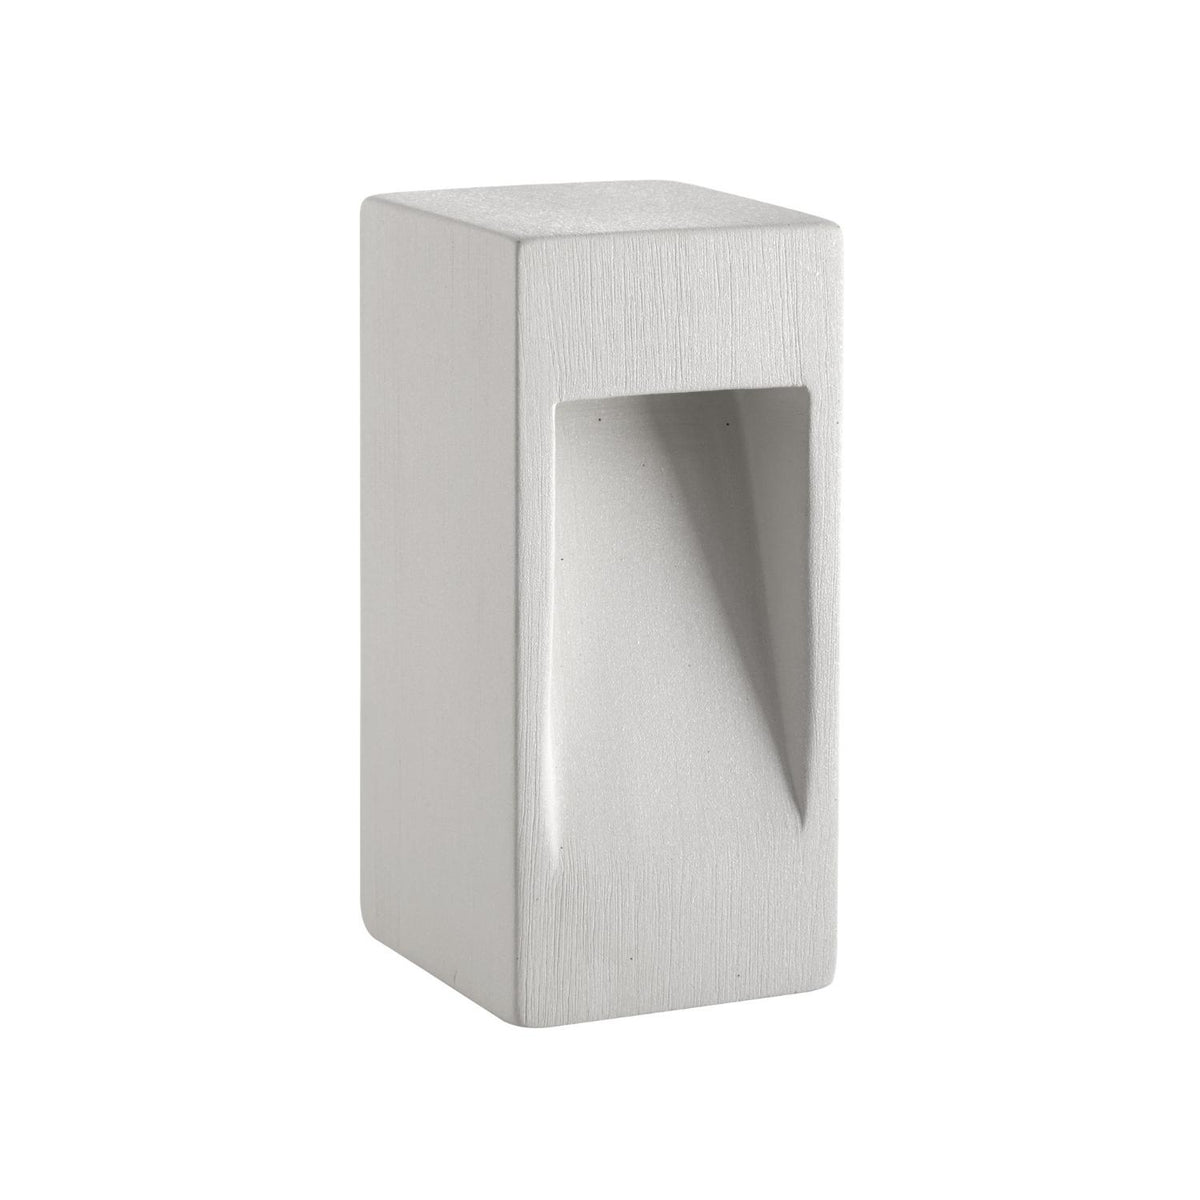 Geo Contemporary - A547 - Lind Wall Sconce - Lind - White